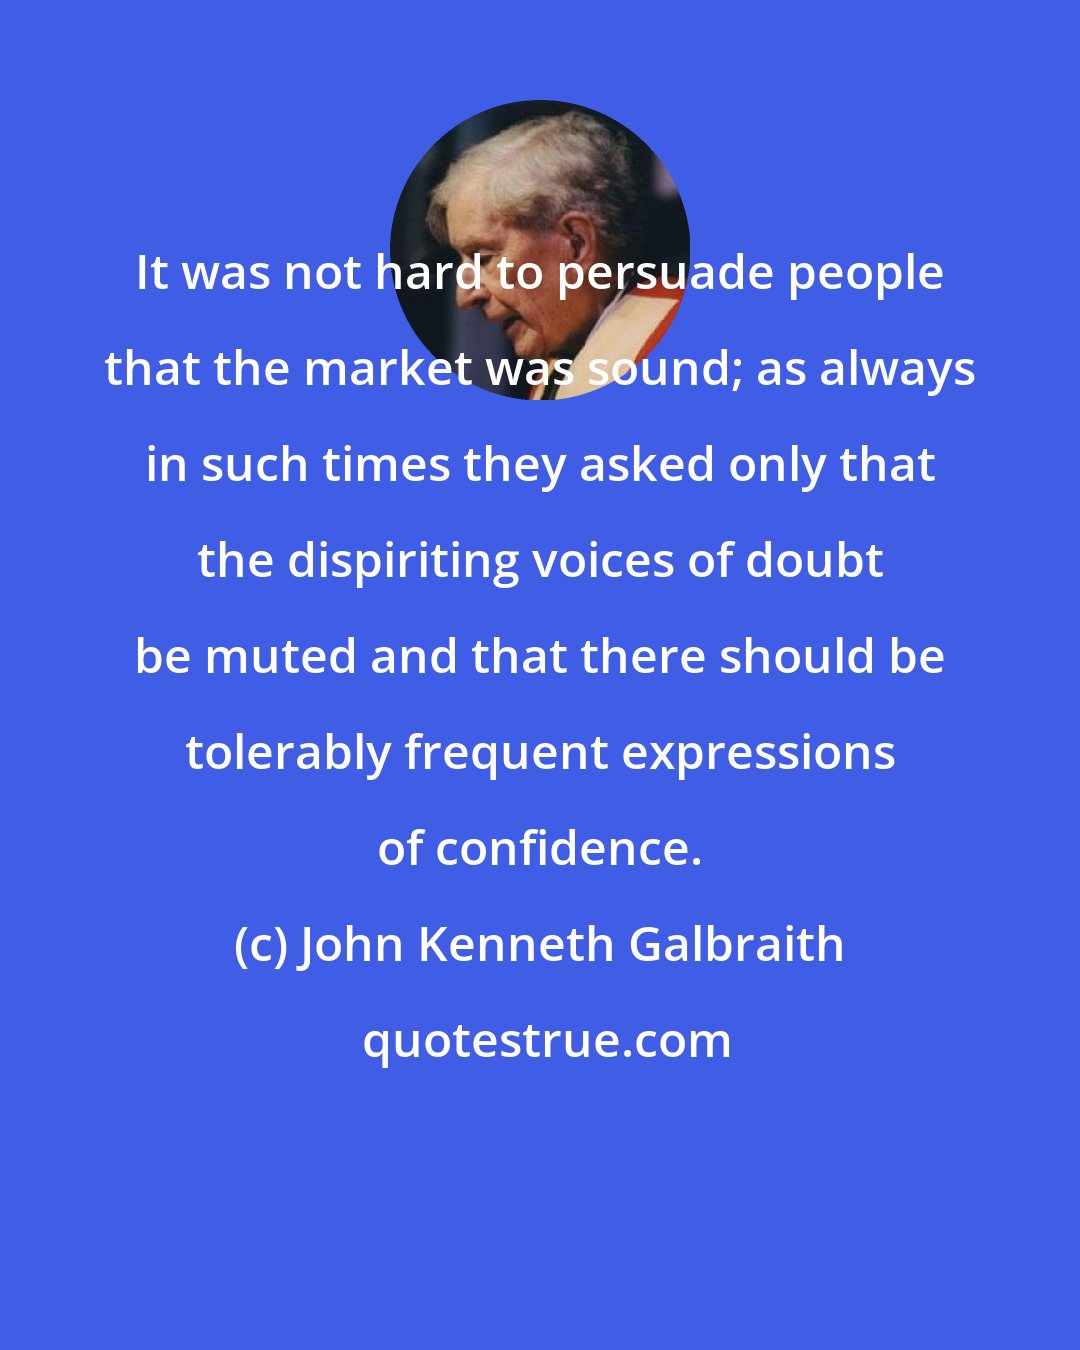 John Kenneth Galbraith: It was not hard to persuade people that the market was sound; as always in such times they asked only that the dispiriting voices of doubt be muted and that there should be tolerably frequent expressions of confidence.